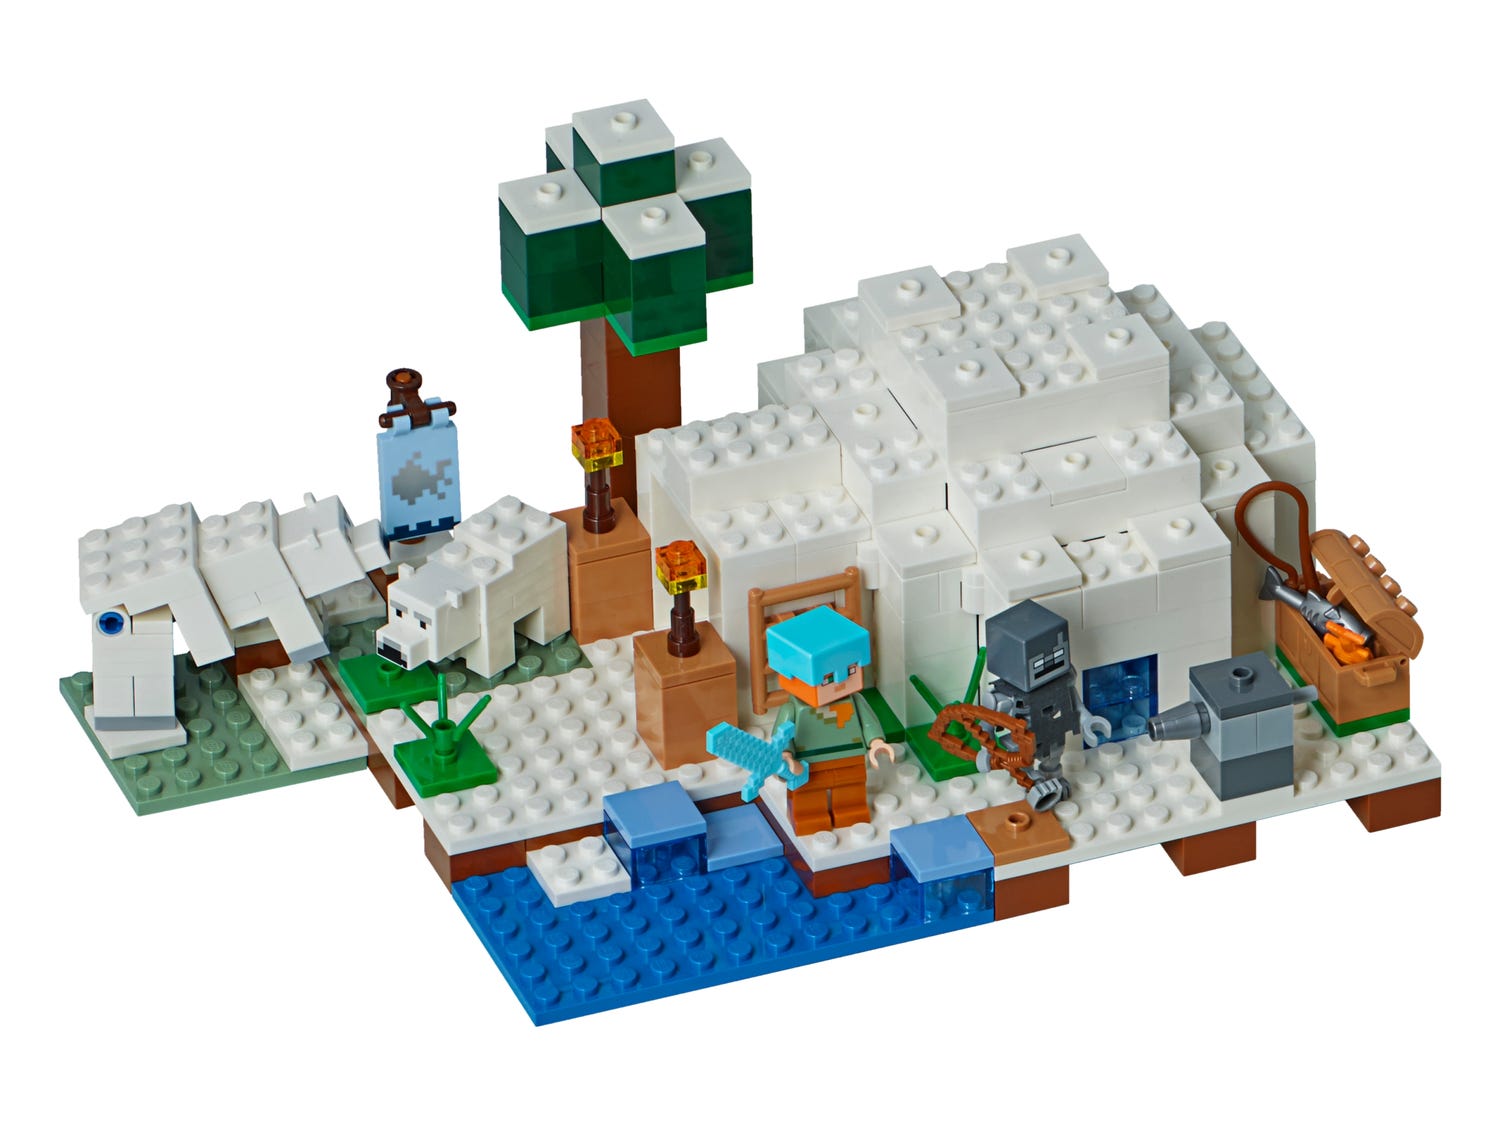 The Polar Igloo Minecraft® | Buy online at the LEGO® Shop US